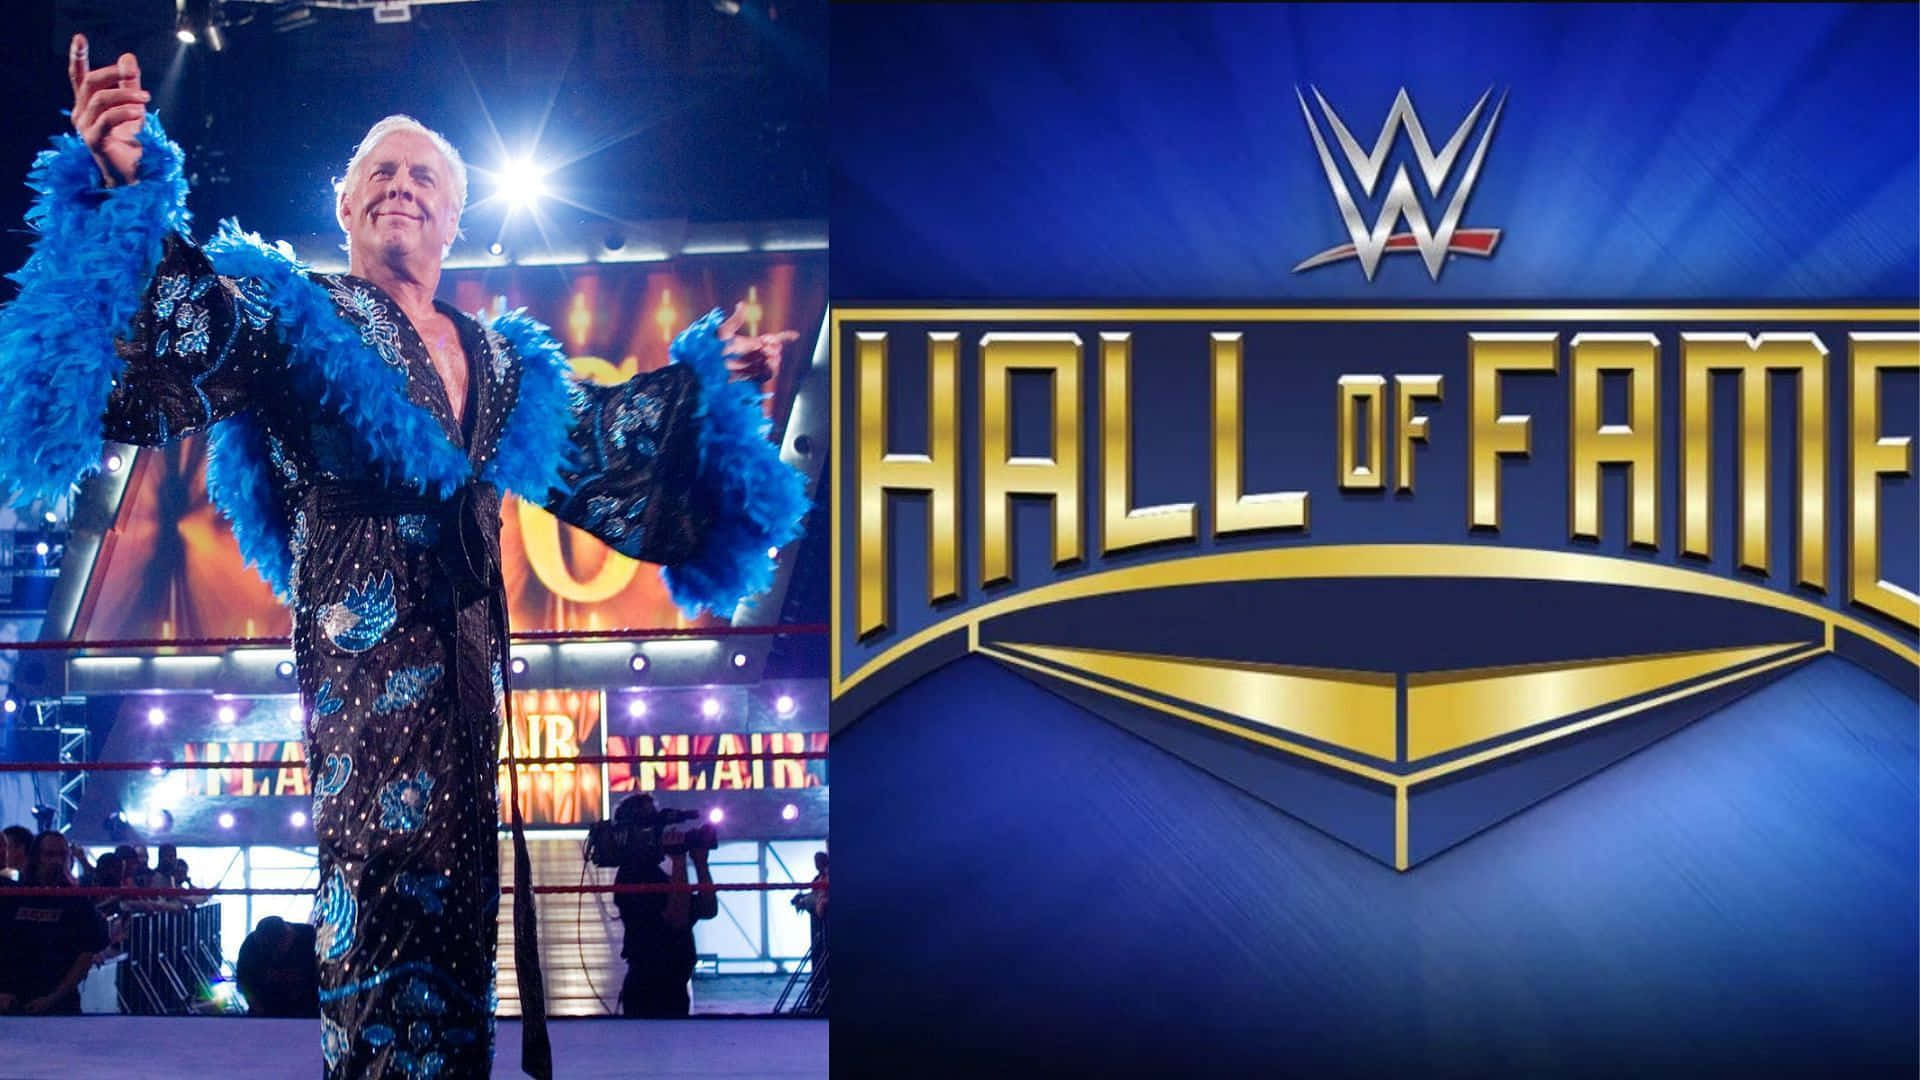 Ric Flair Wwe Hall Of Fame Background